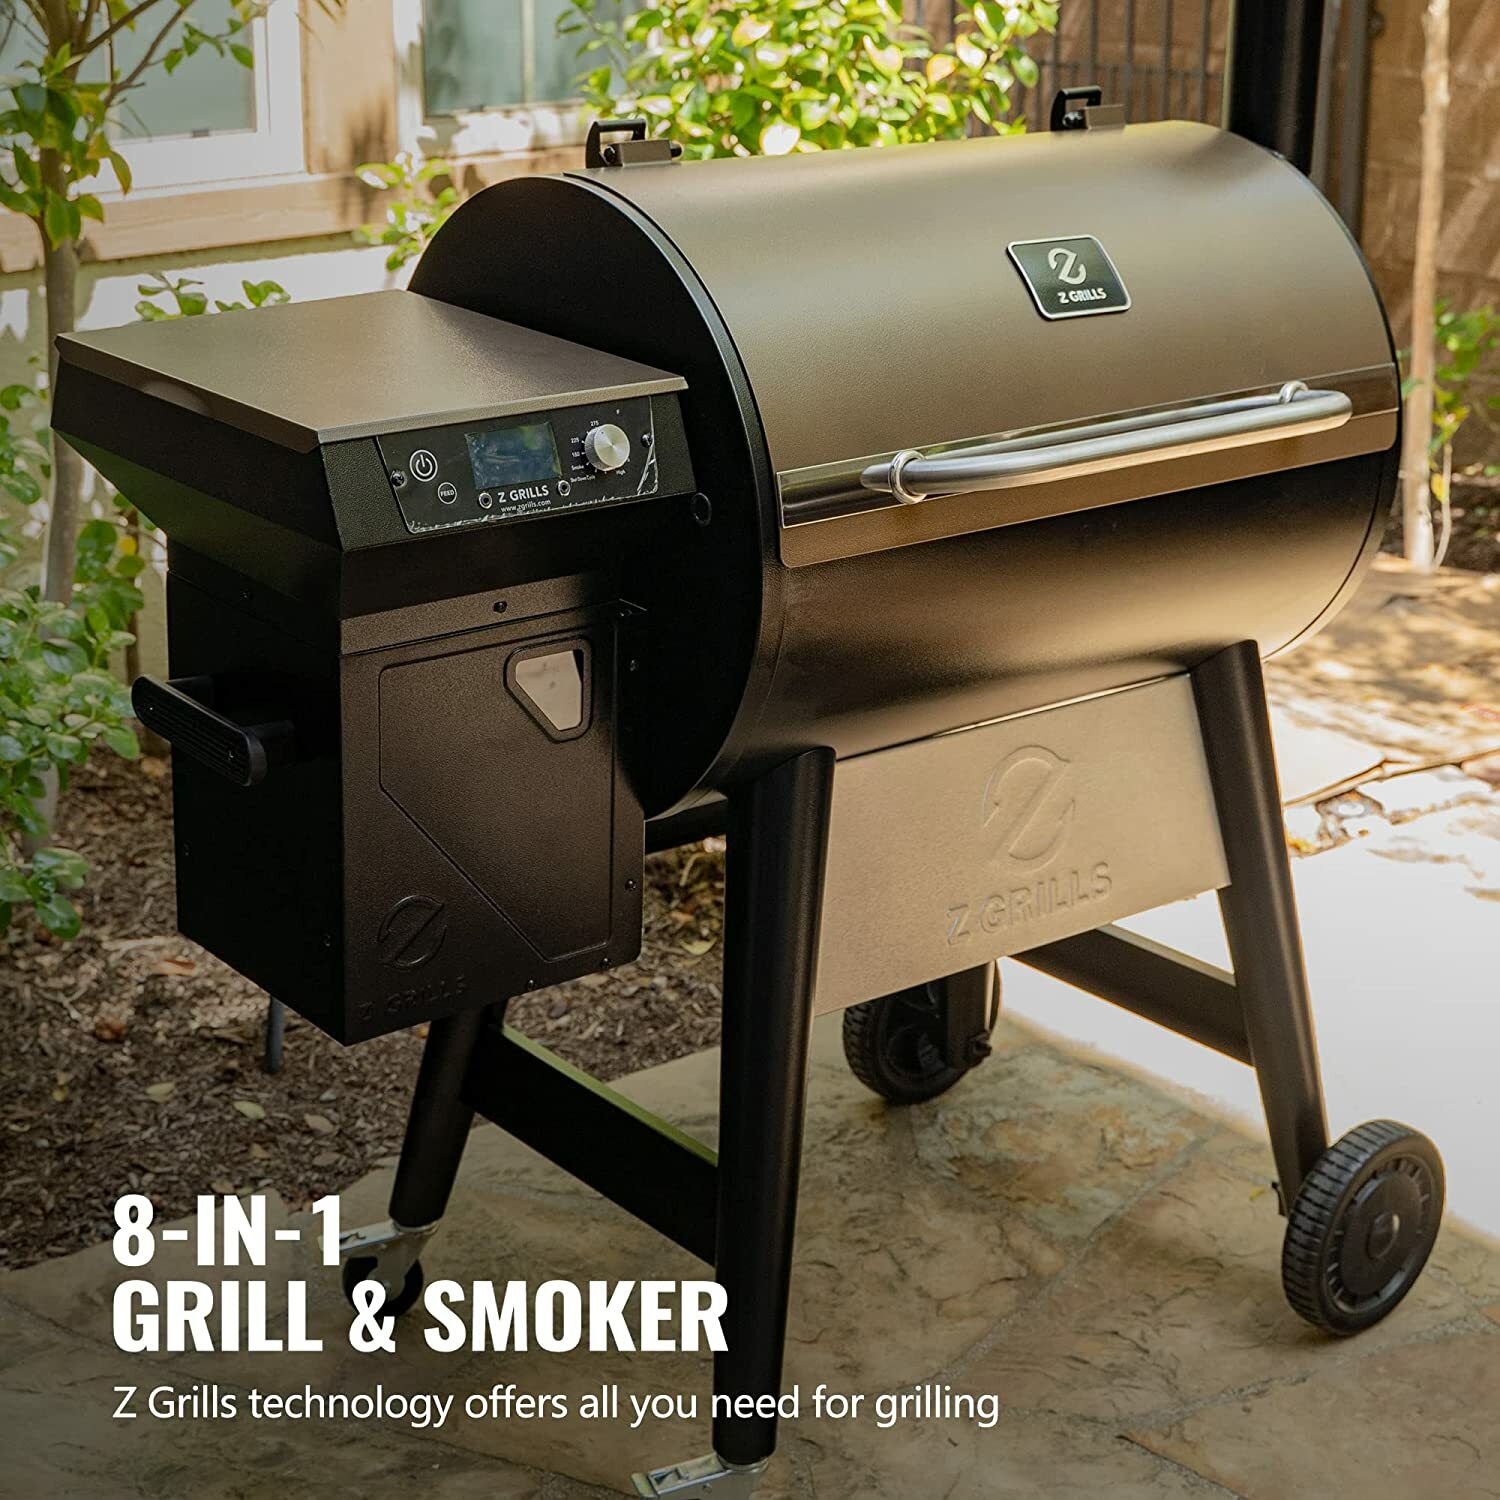 Z GRILLS ZPG-7002C3E 694 sq. in. Wood Pellet Grill and Smoker 8-in-1 BBQ Bronze - image 3 of 10